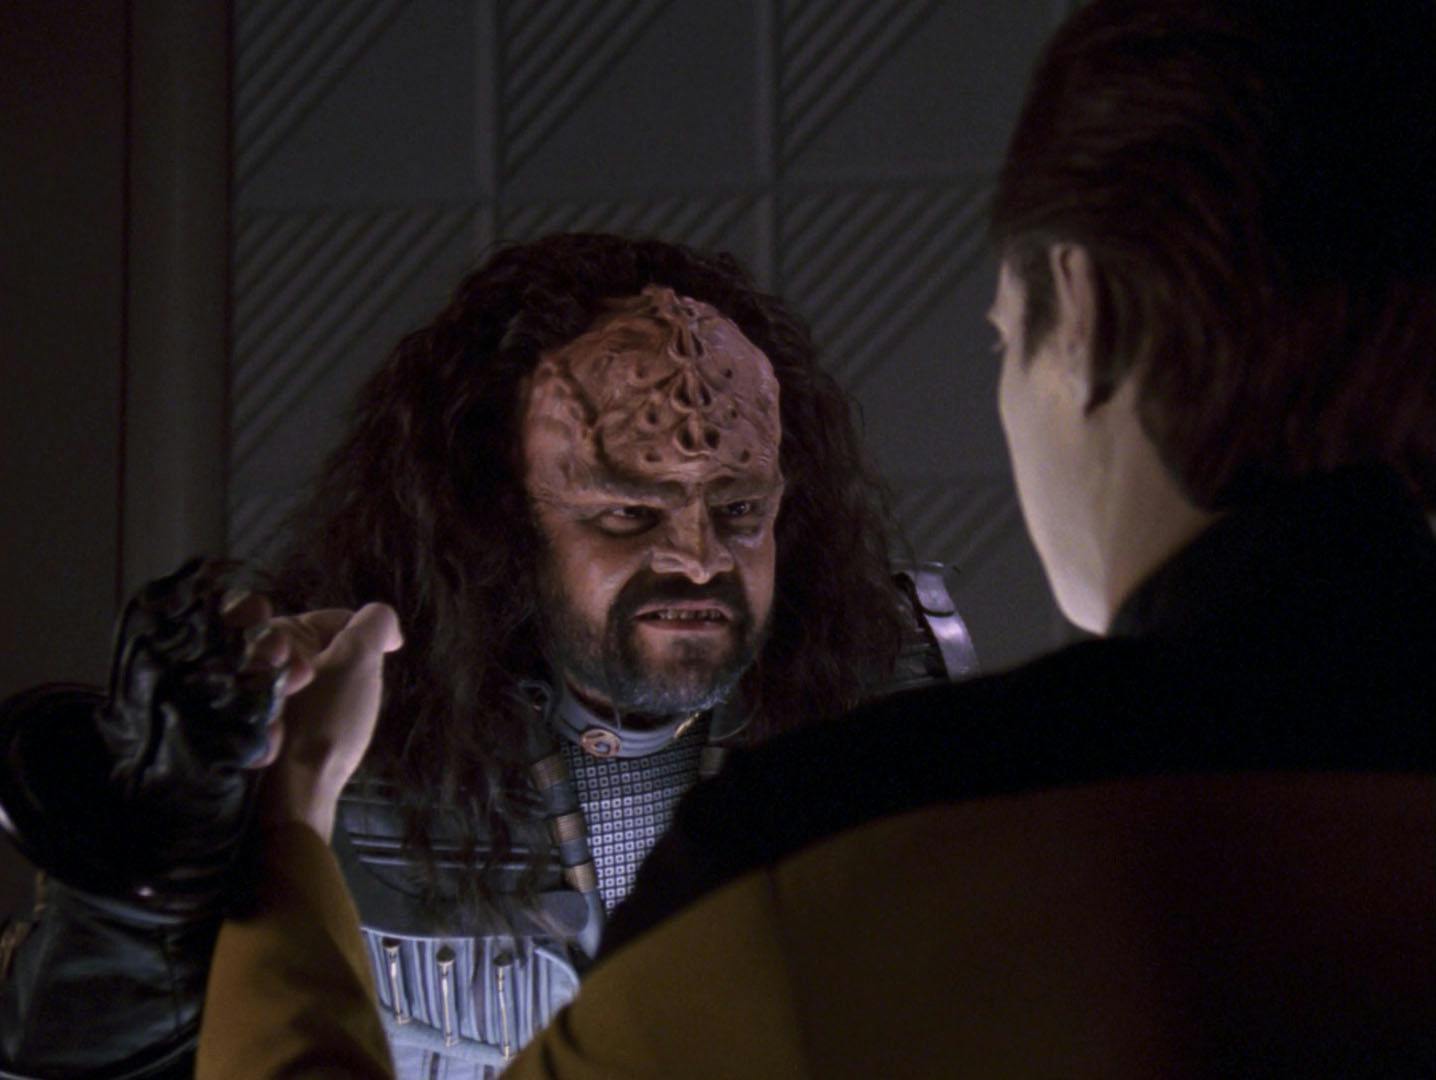 At 10 Forward, the Klingon Nu'Daq seeks out Data and challenges him to the B'aht Qul challenge in 'The Chase'